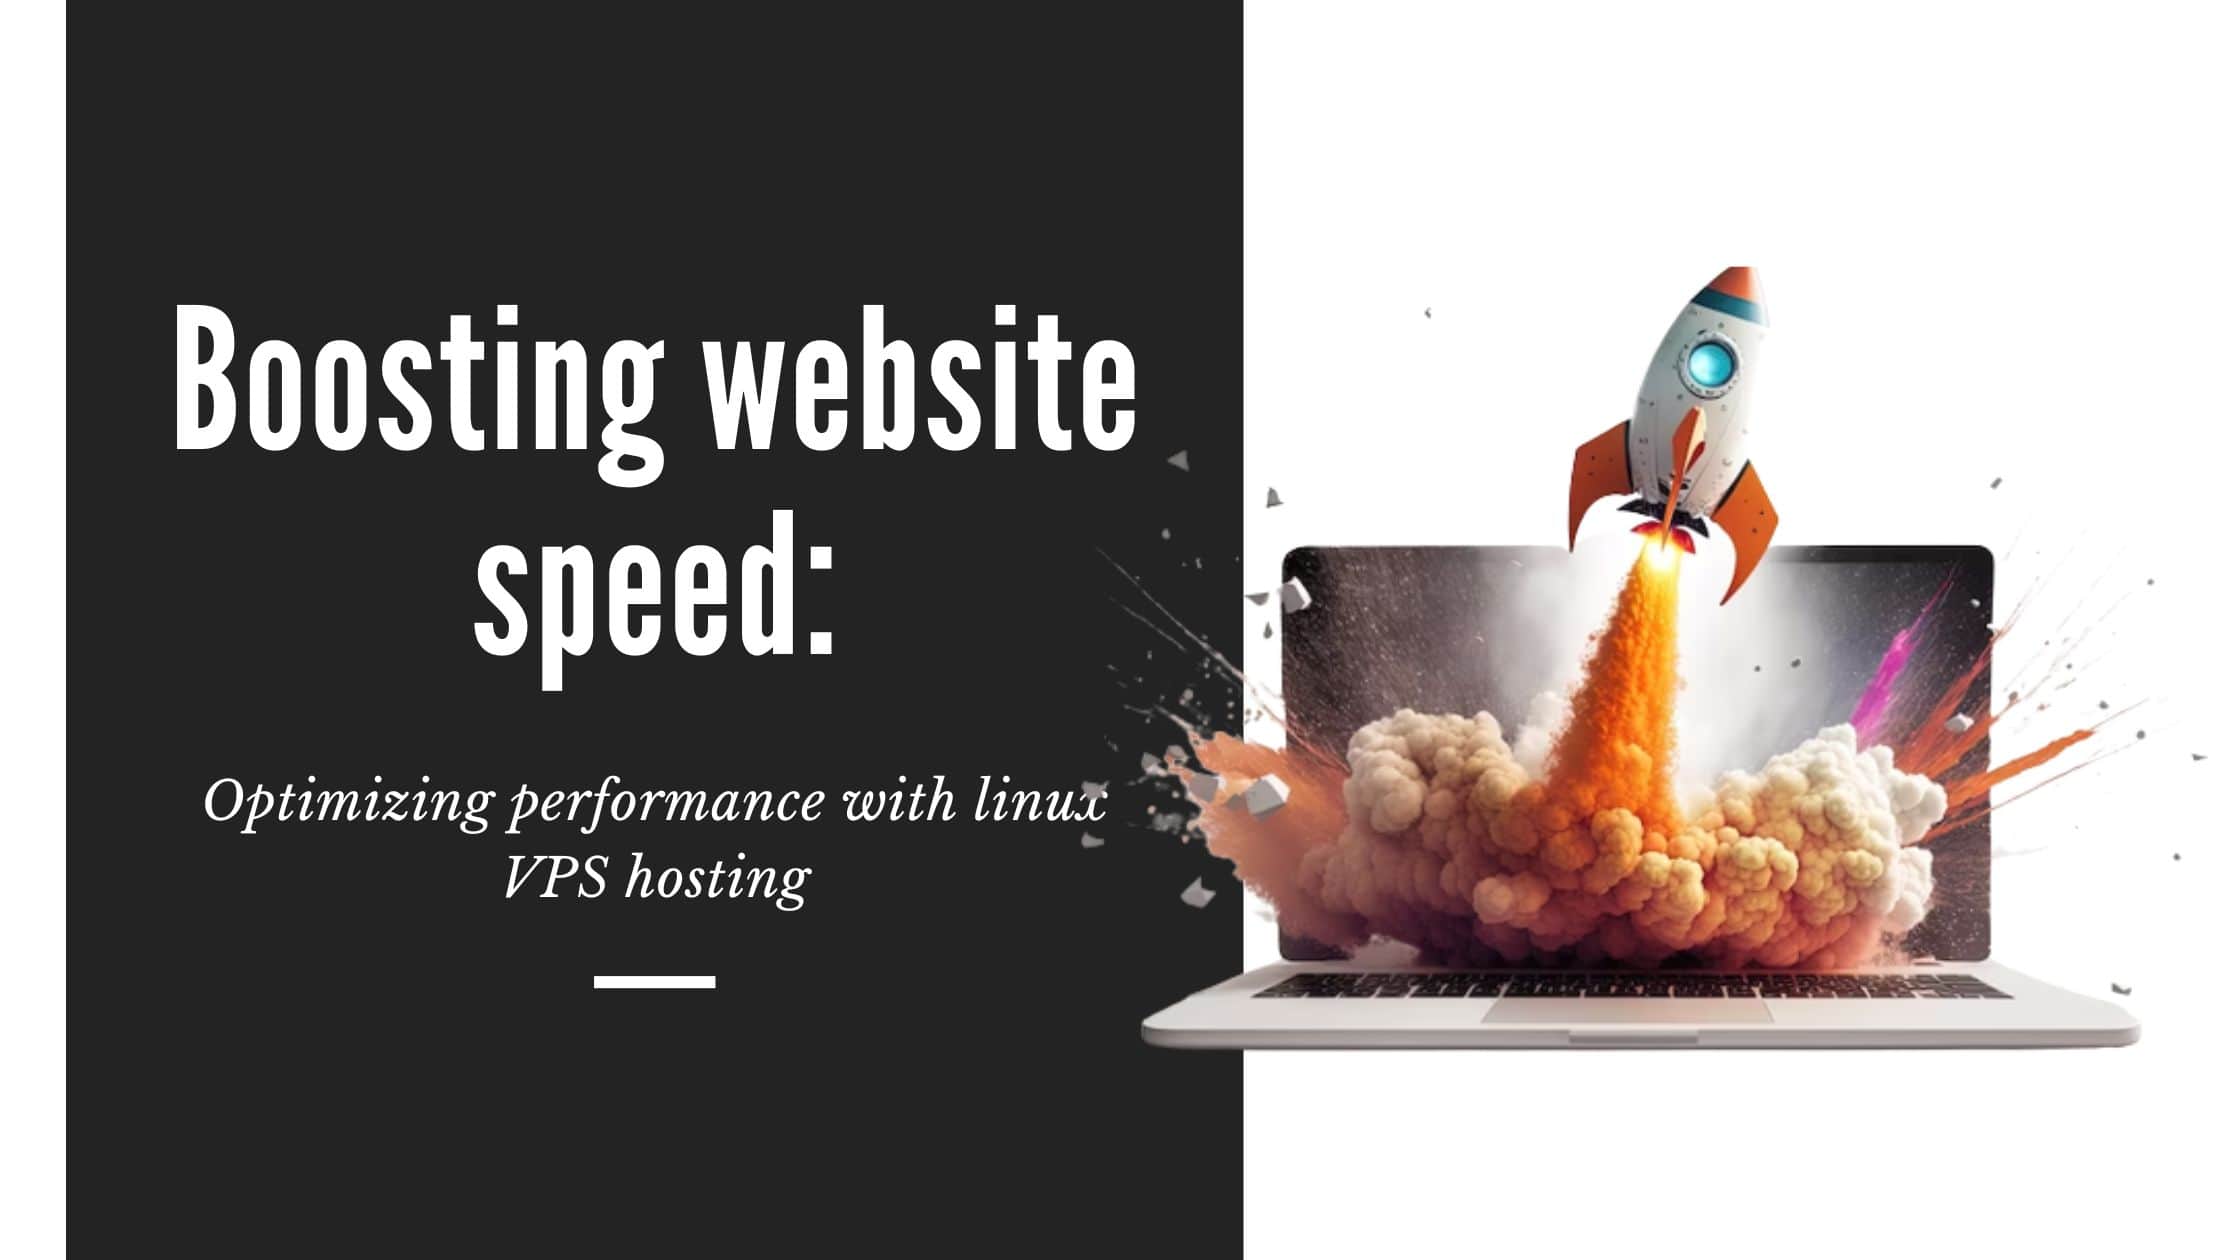 Boosting website speed: Optimizing performance with linux VPS hosting